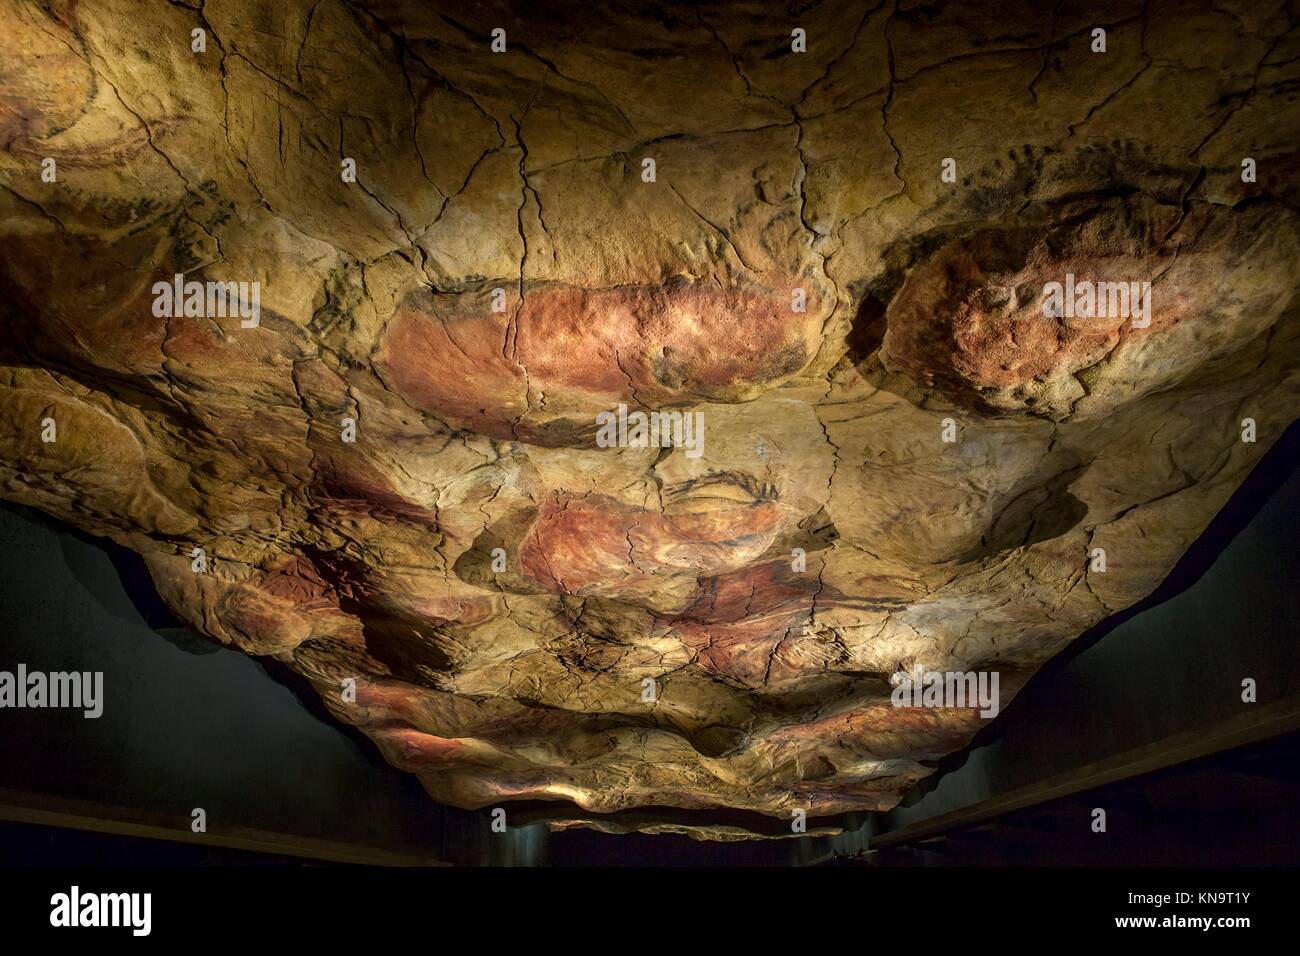 Madrid, Spain - february 24, 2017: Altamira replica cave at National Archeological Museum, Madrid, Spain. Stock Photo